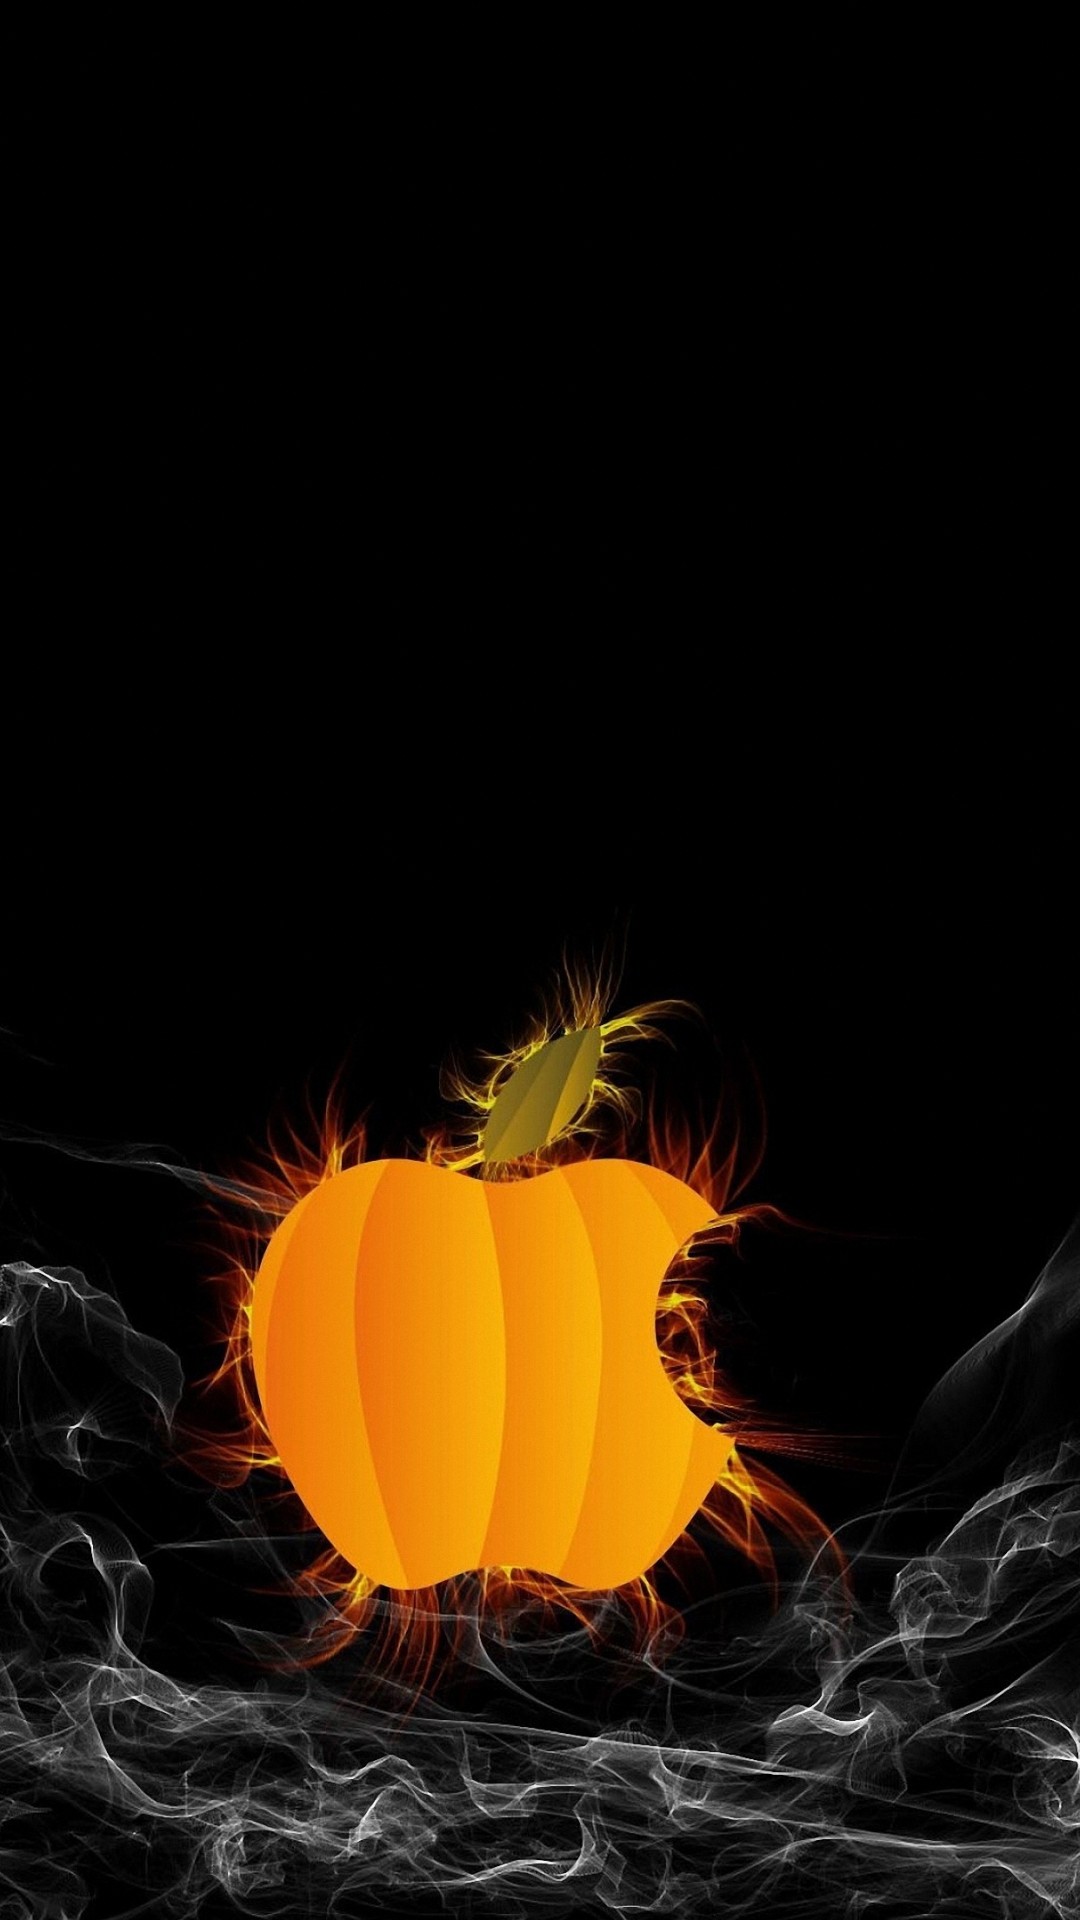 IPumpkin – Tap to see more creatively spooky Halloween wallpaper mobile9